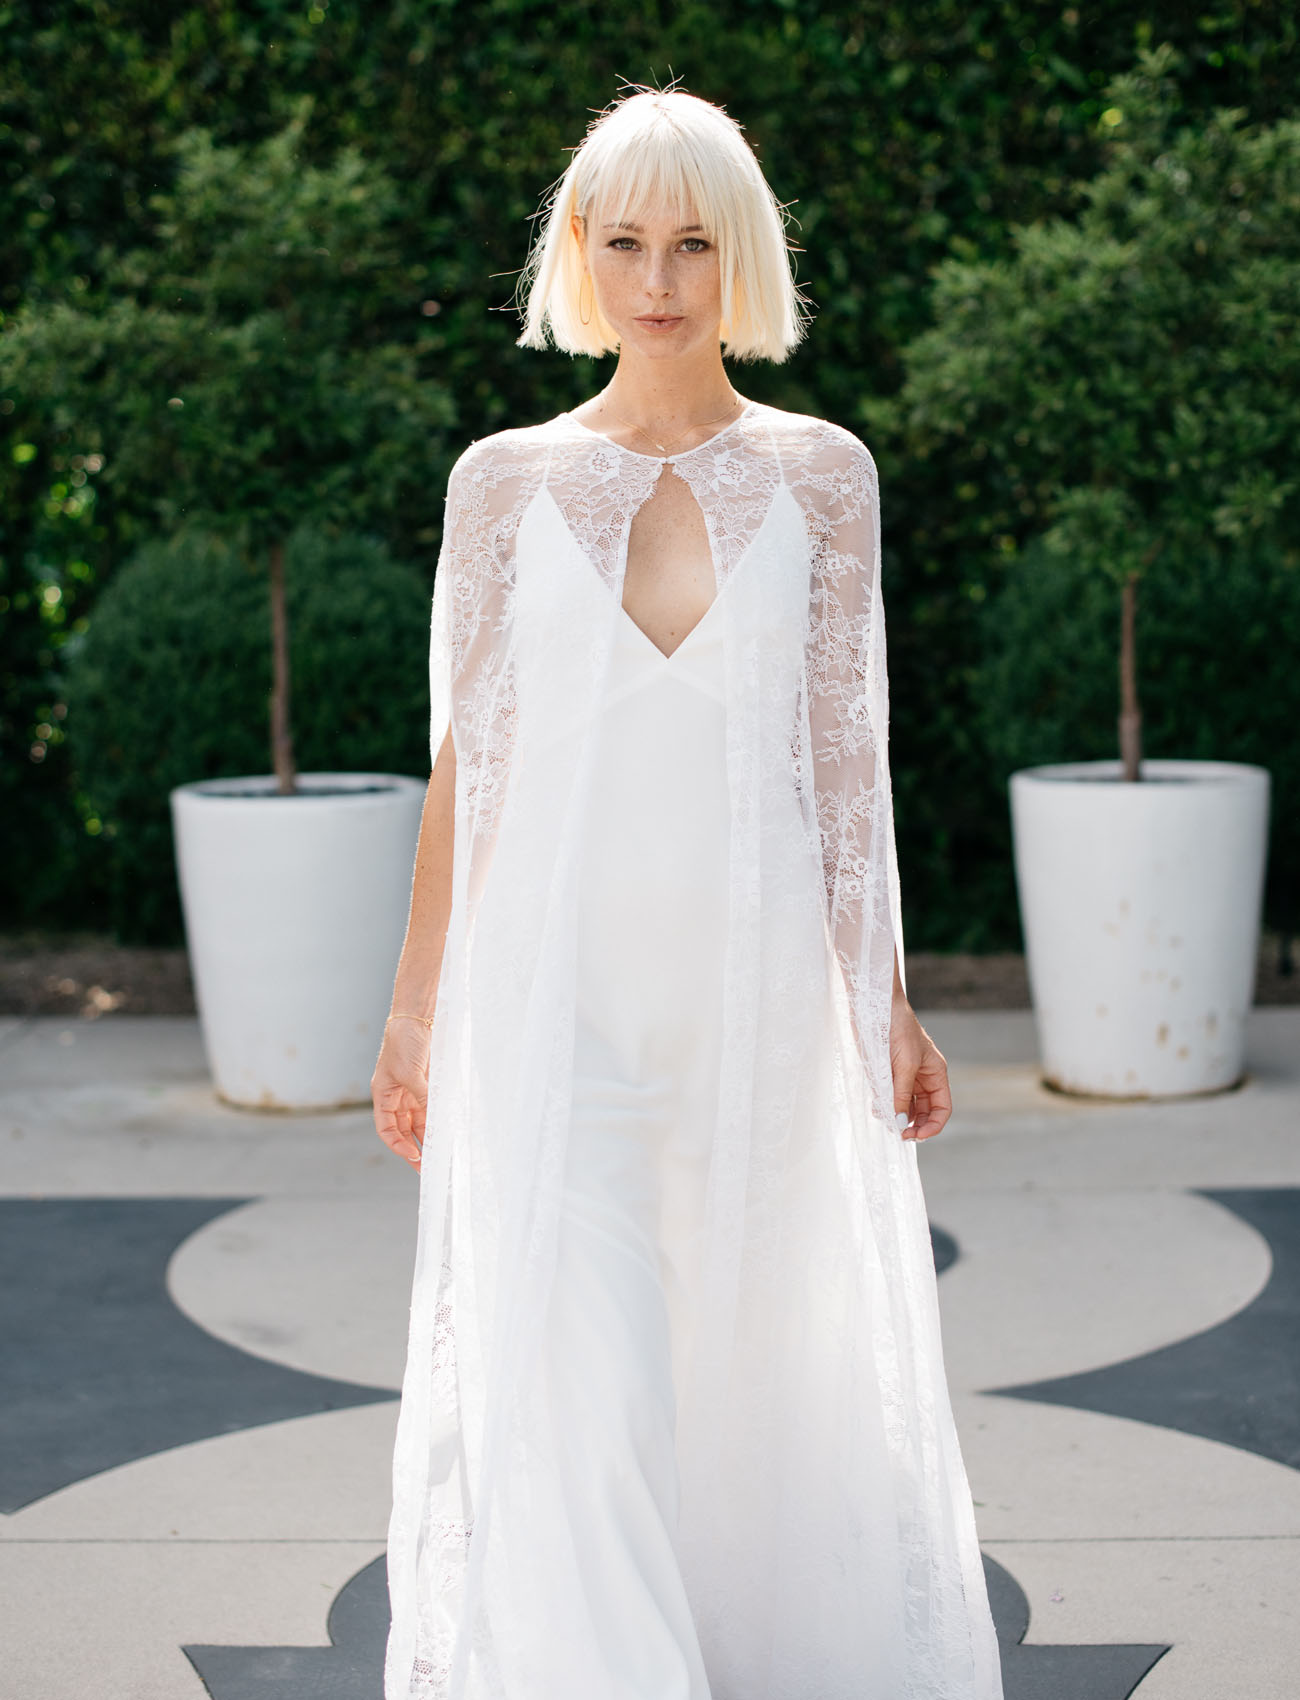 She had also a white lace cape over the dress for an ethereal look